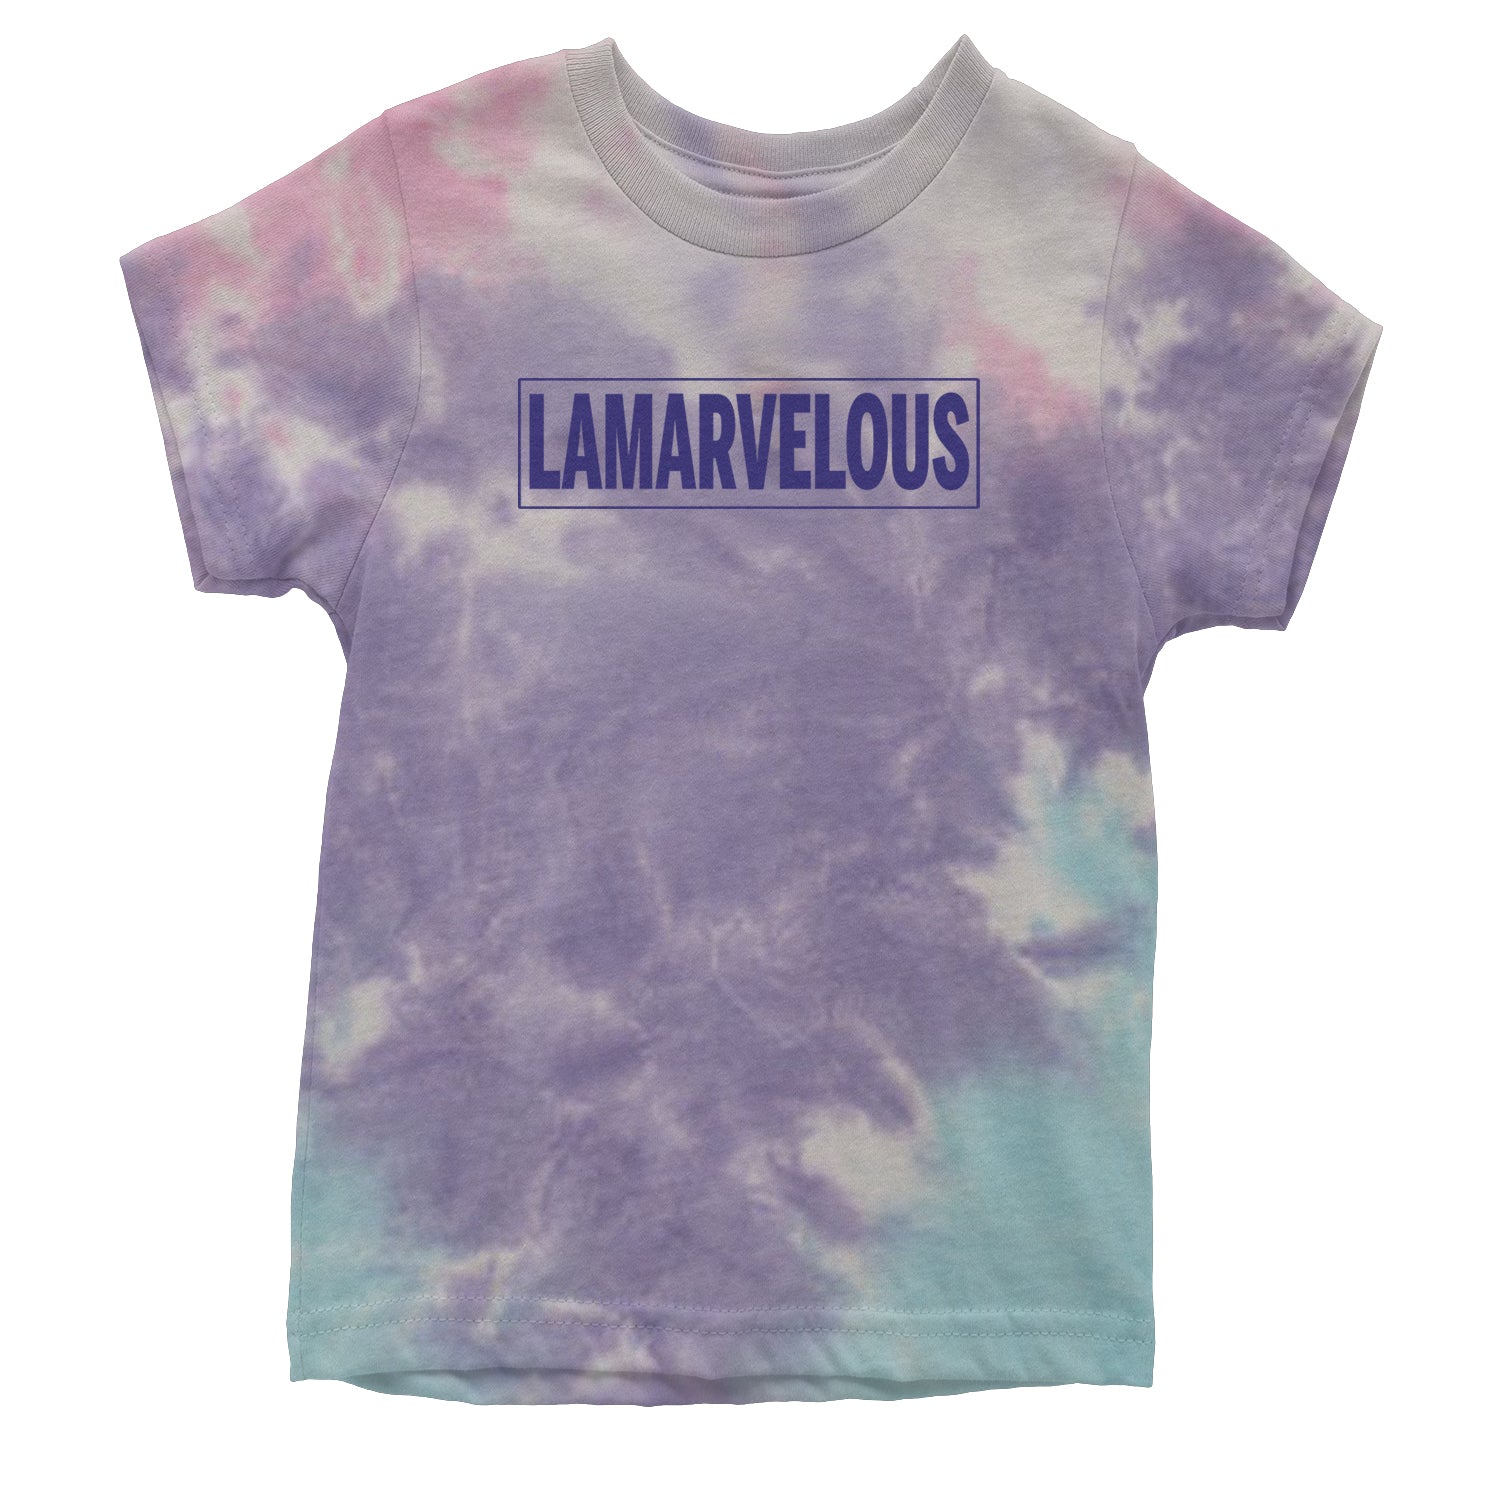 LaMarvelous Football Youth T-shirt back, ball, baltimore, foot, football, quarter, quarterback by Expression Tees